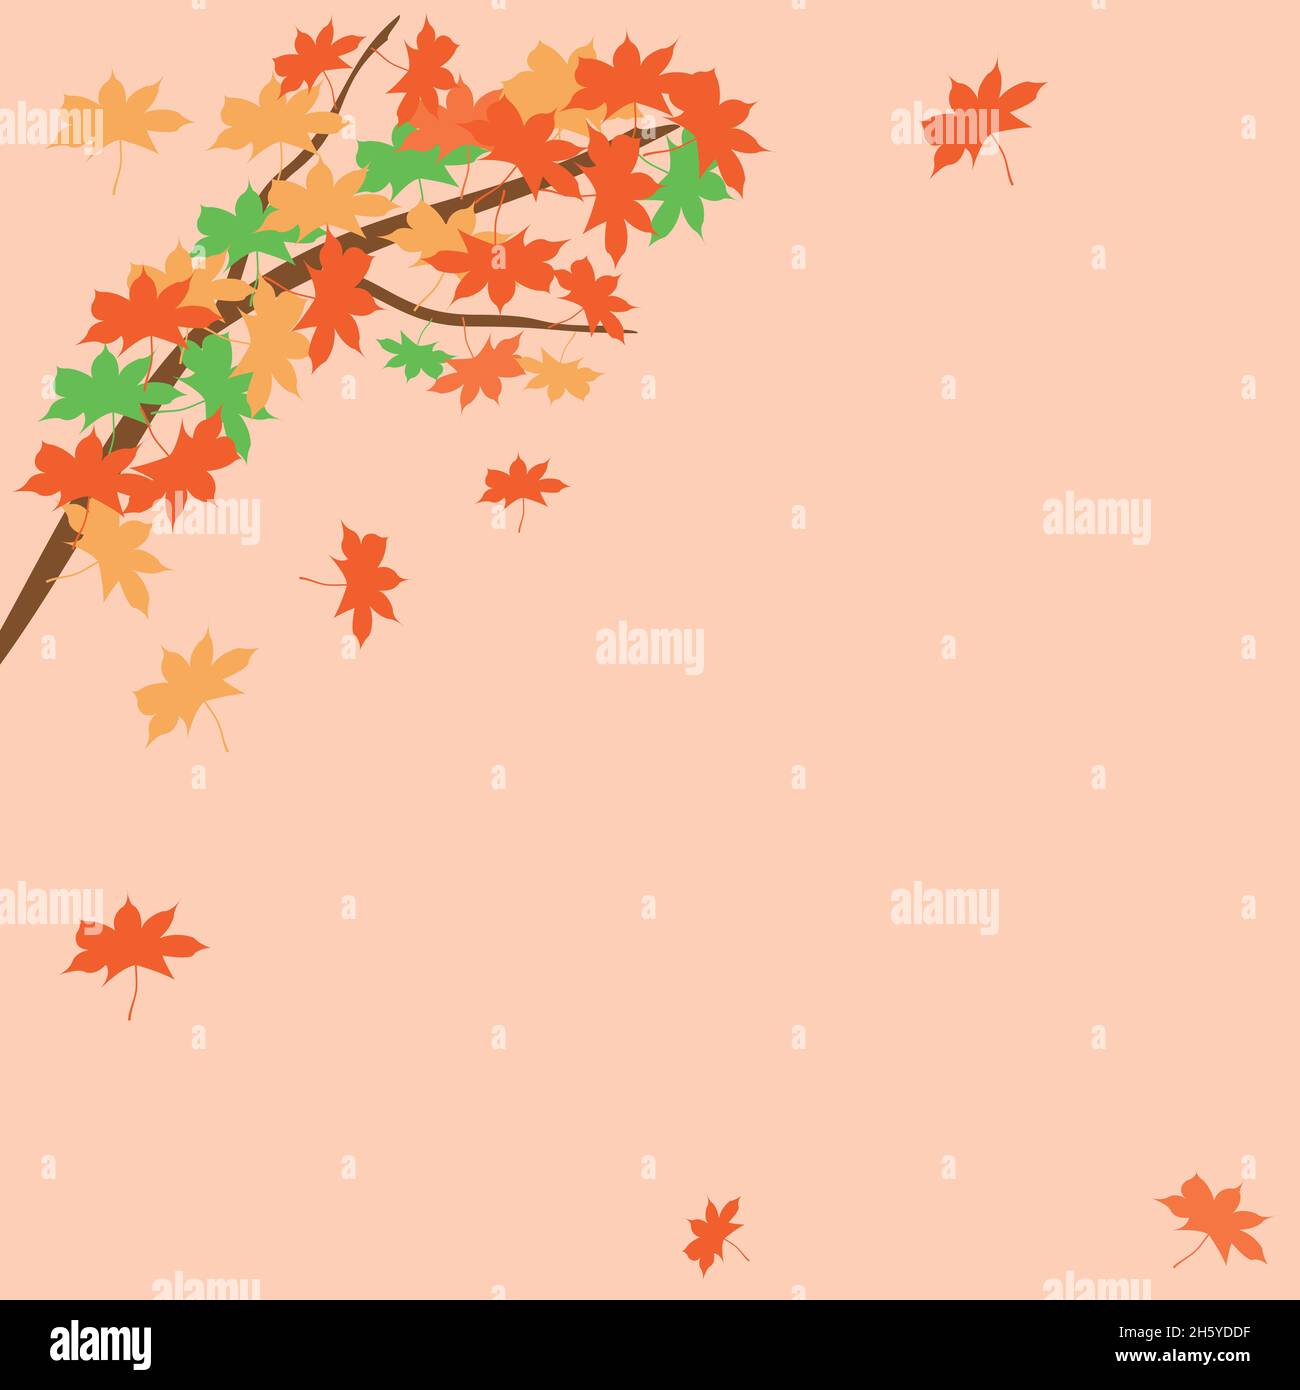 The background of maple leaves where you can feel that autumn has come. Stock Vector